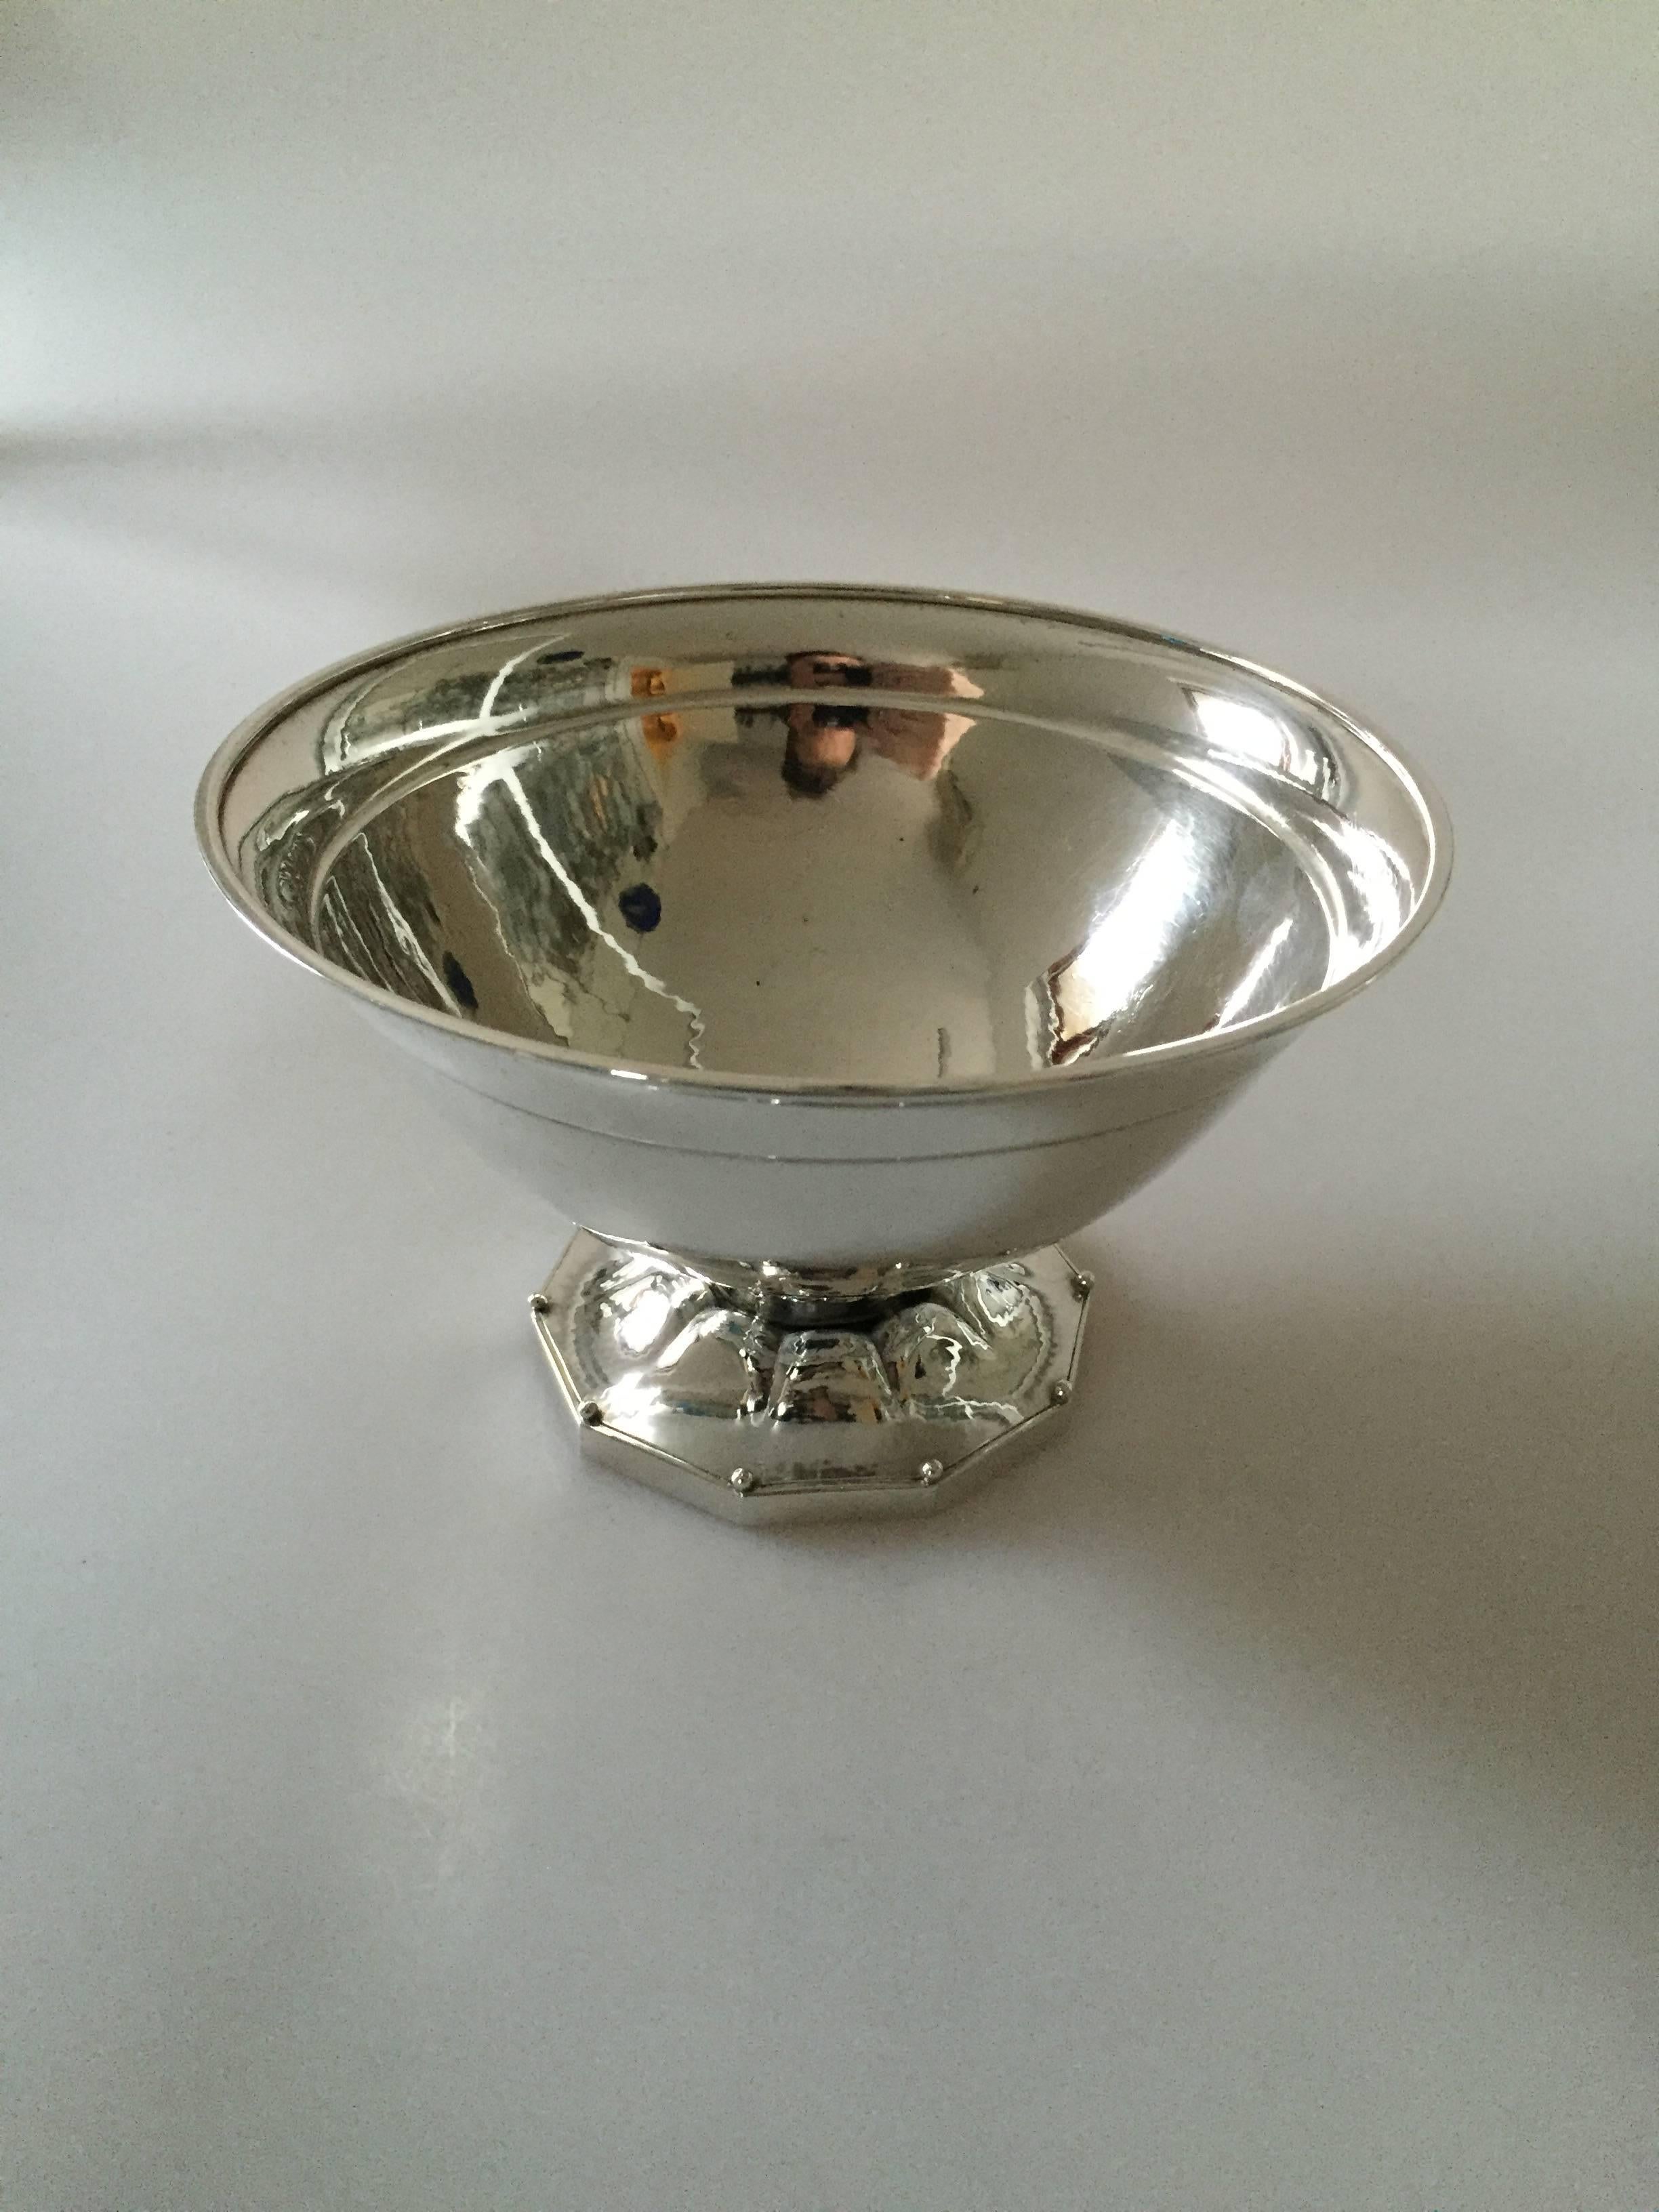 Georg Jensen sterling silver bowl #424. From 1915-1927.

Measures 16.2 cm x 9.7 cm.